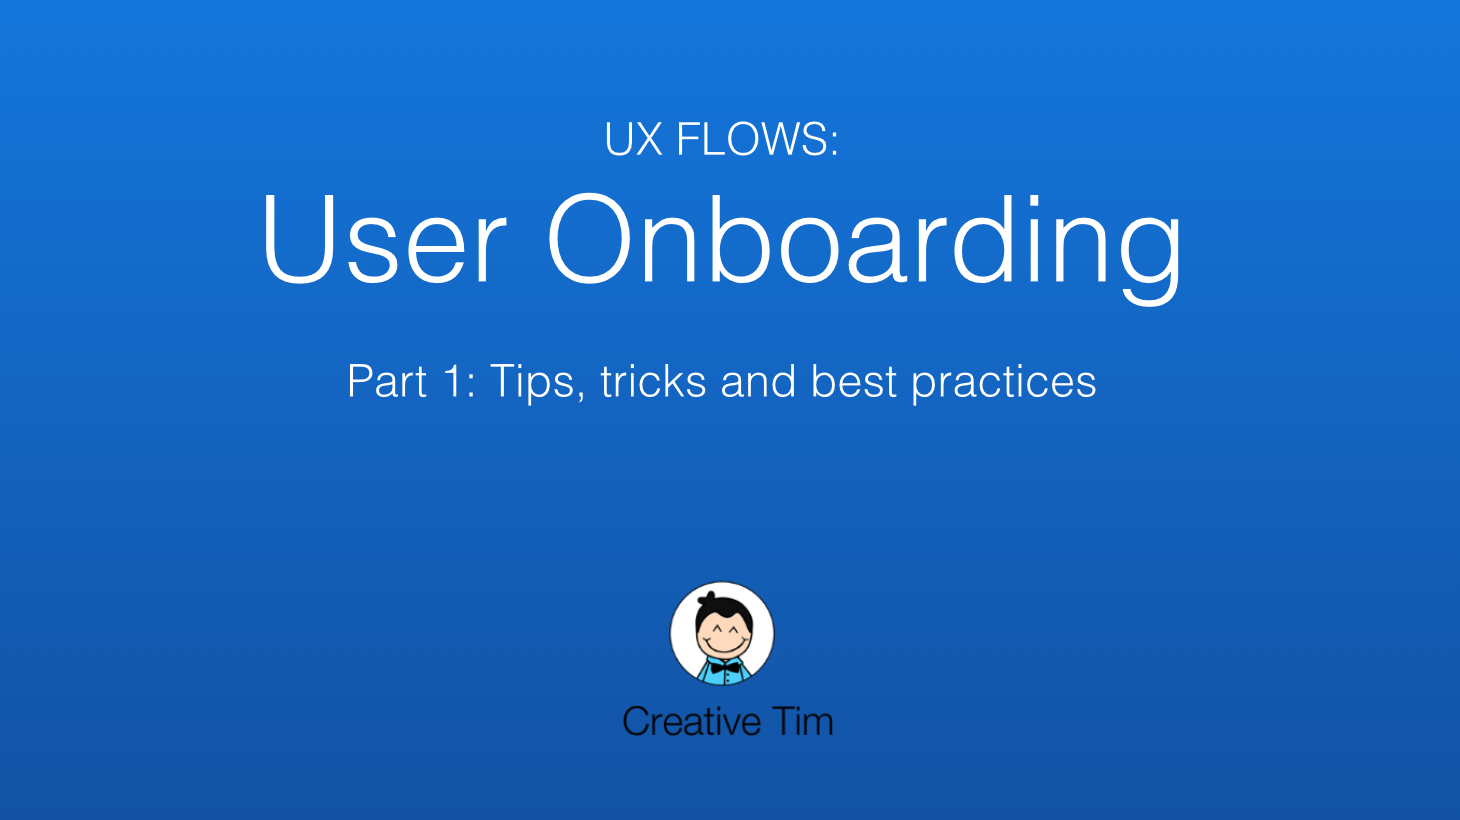 The Process of Onboarding Users - Tips, tricks and best practices